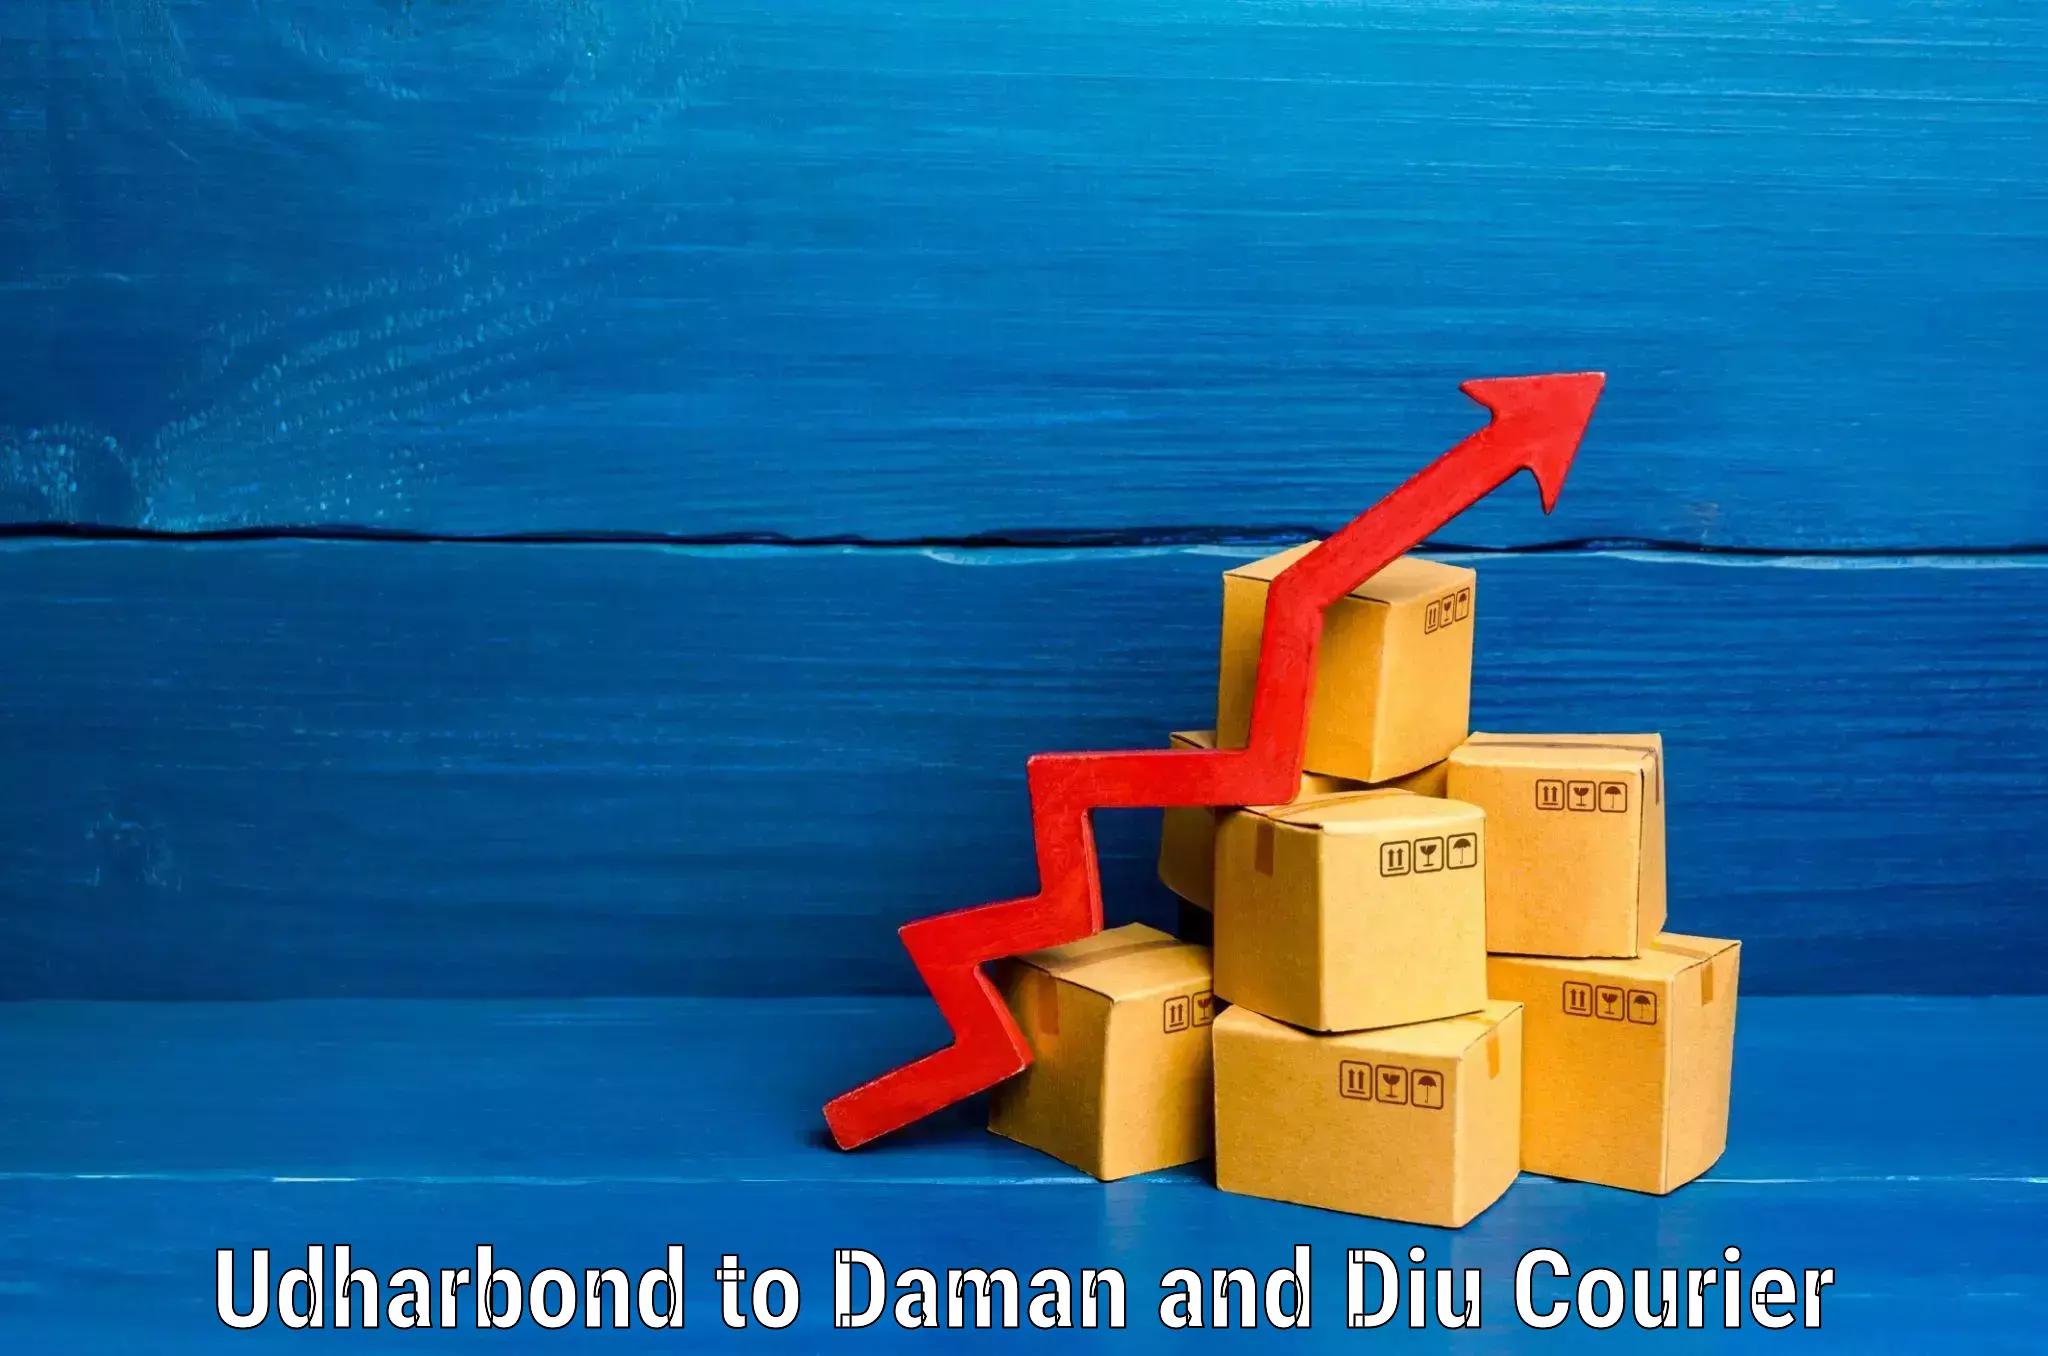 Luggage transport consultancy Udharbond to Daman and Diu